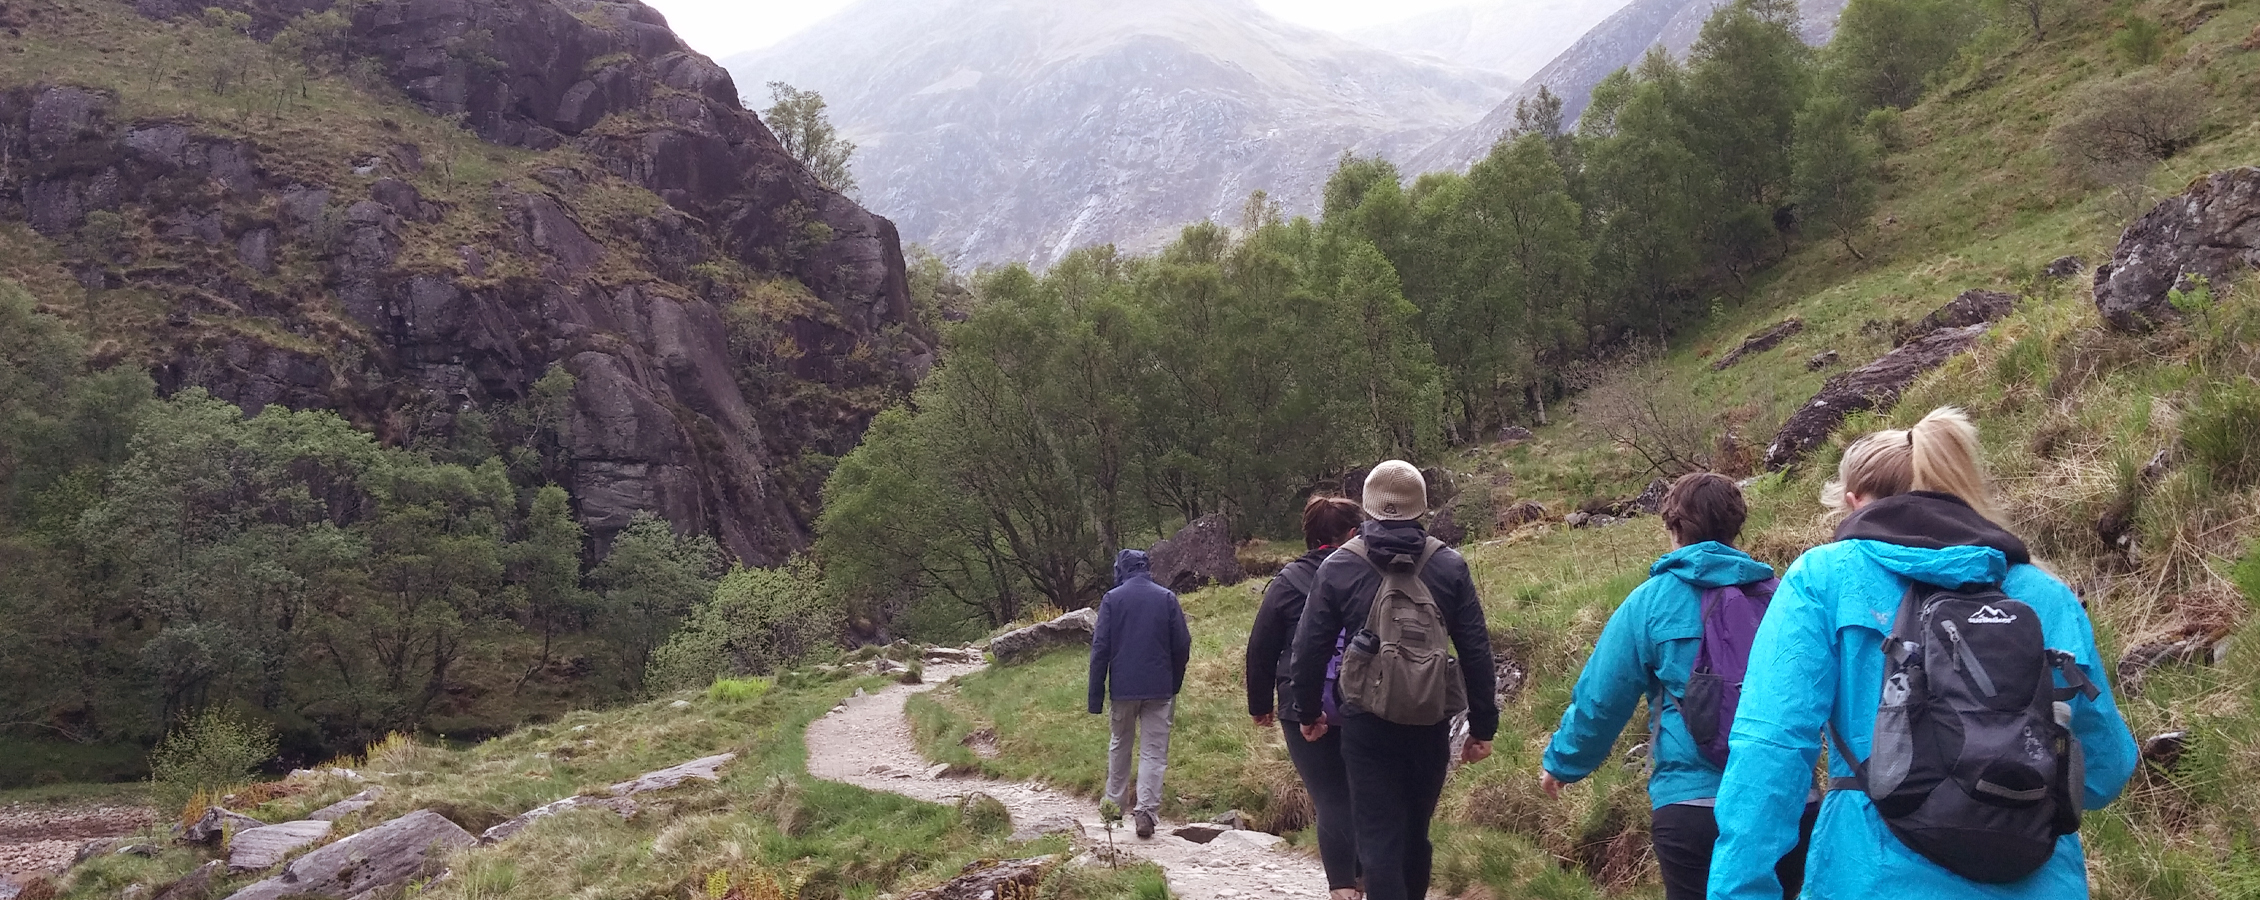 A group of people hike on a worn path amidst mountains and clouds.